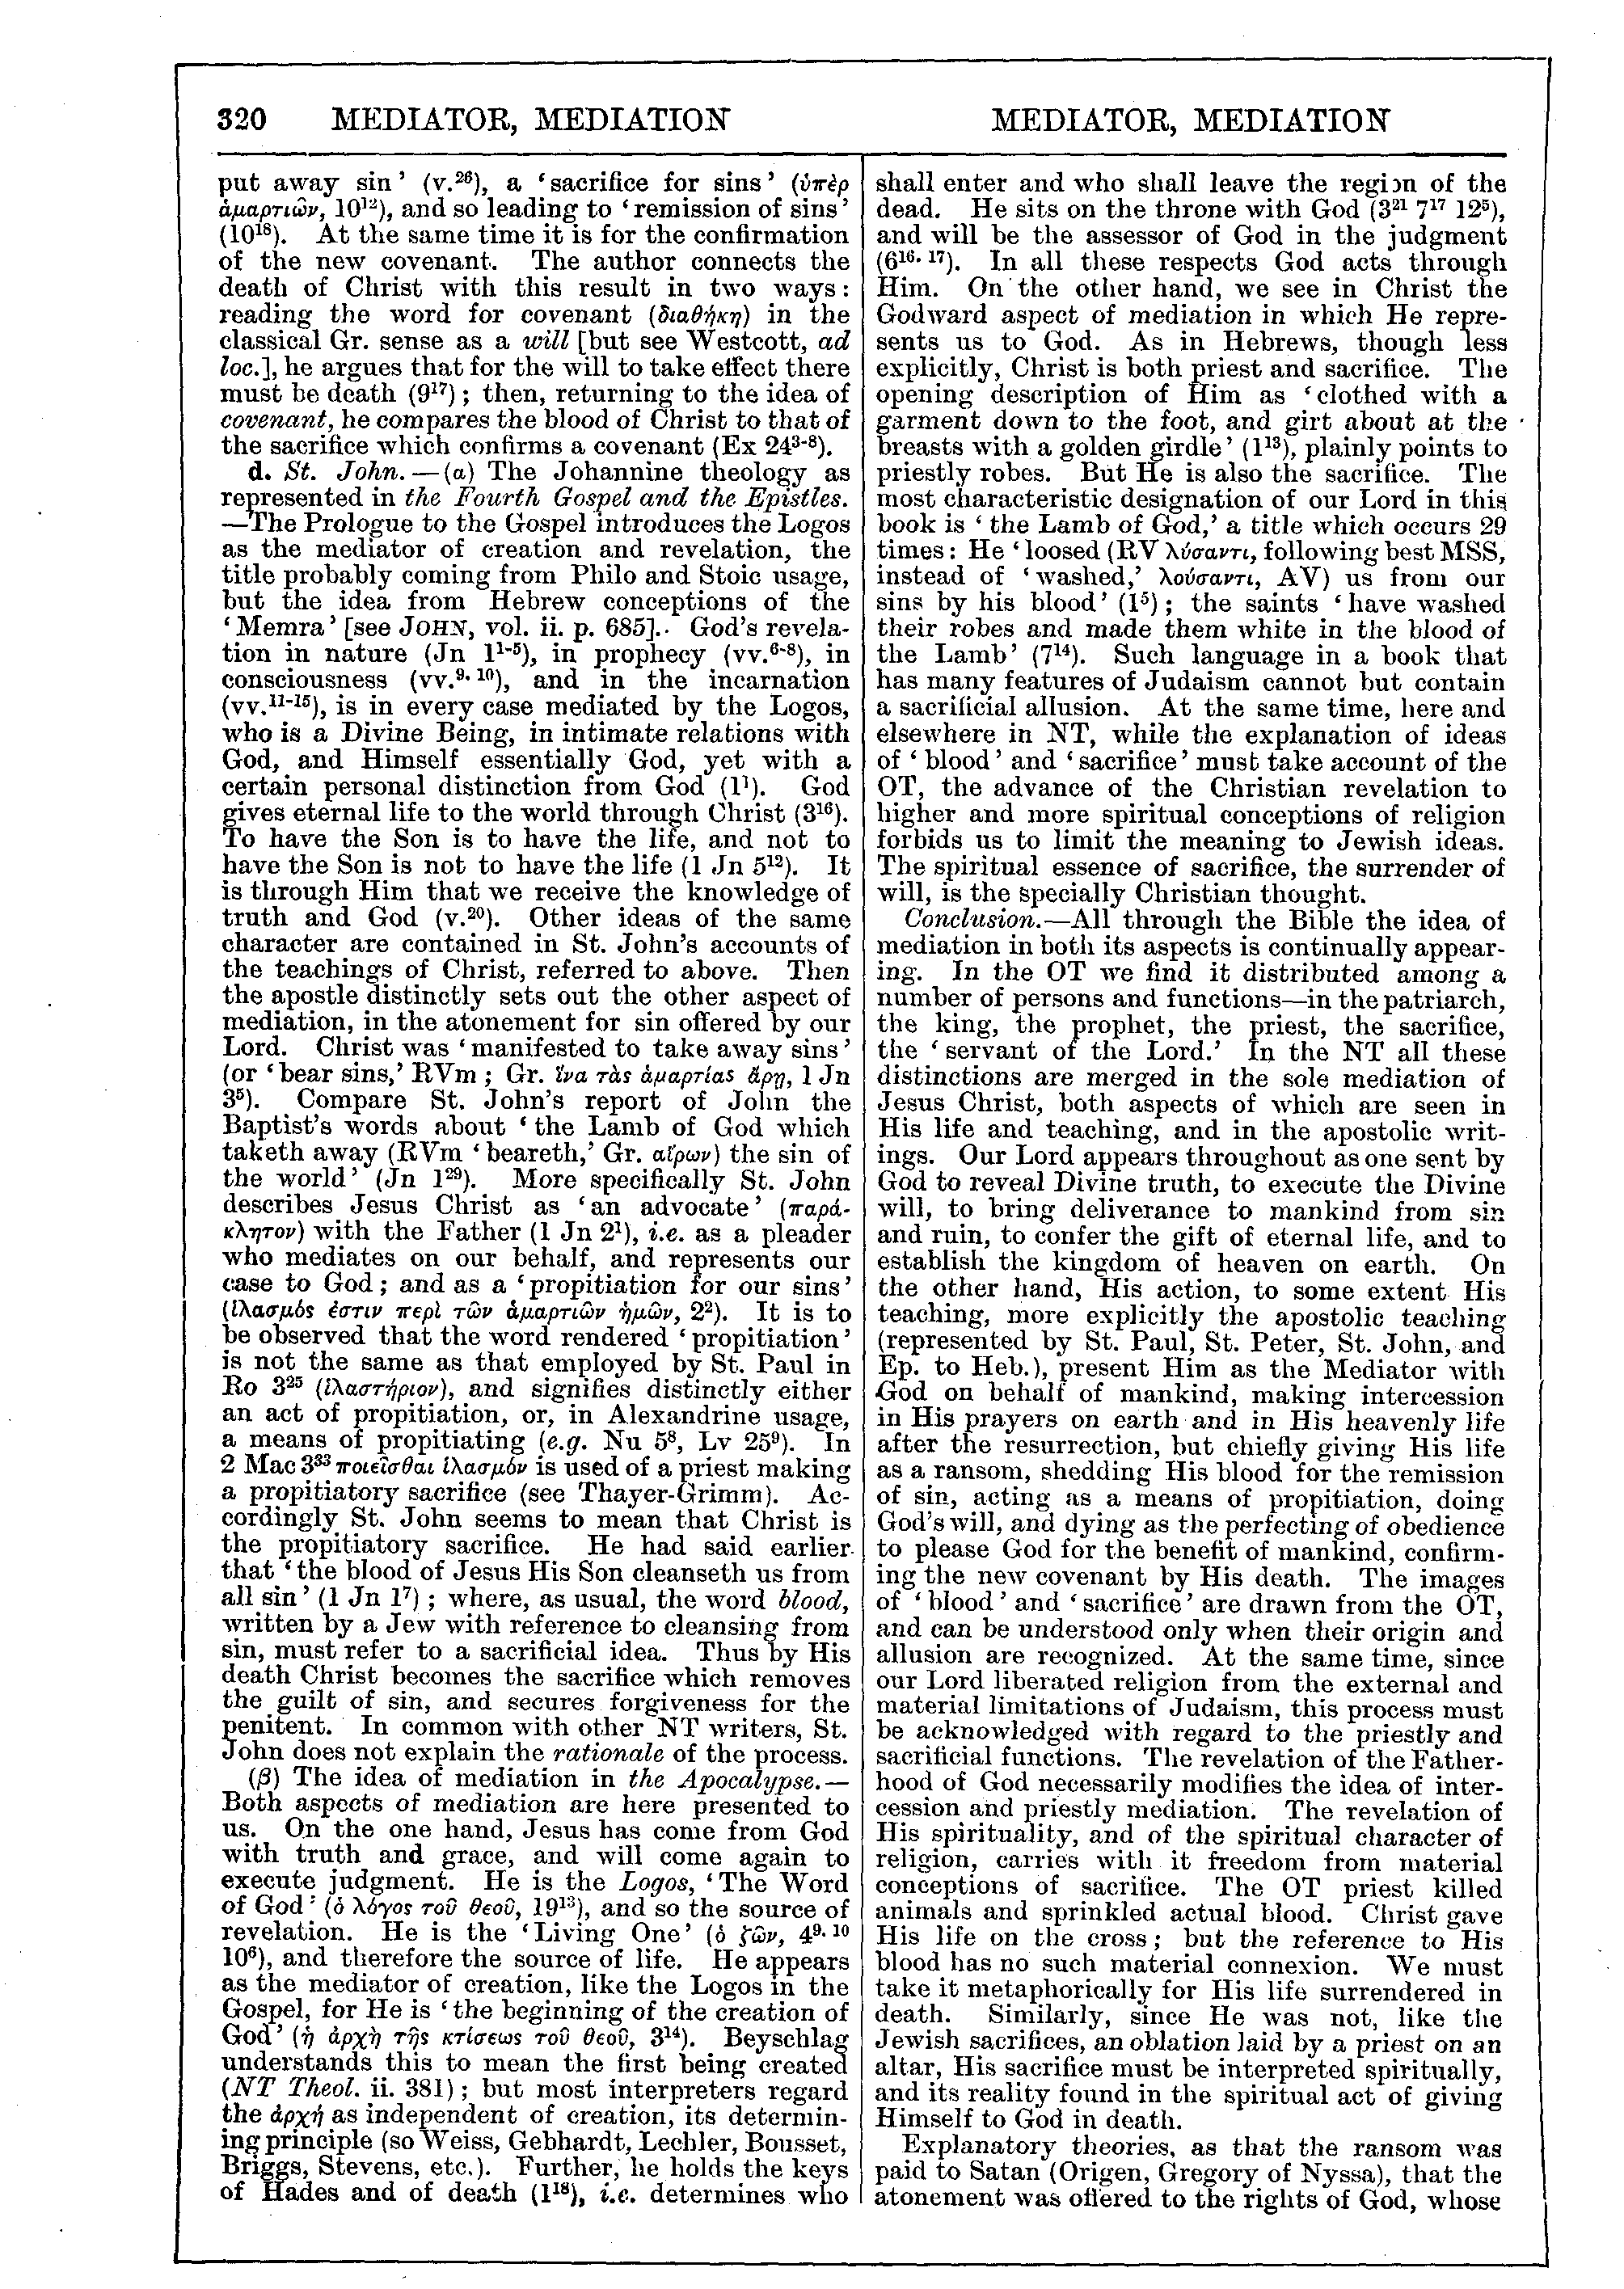 Image of page 320